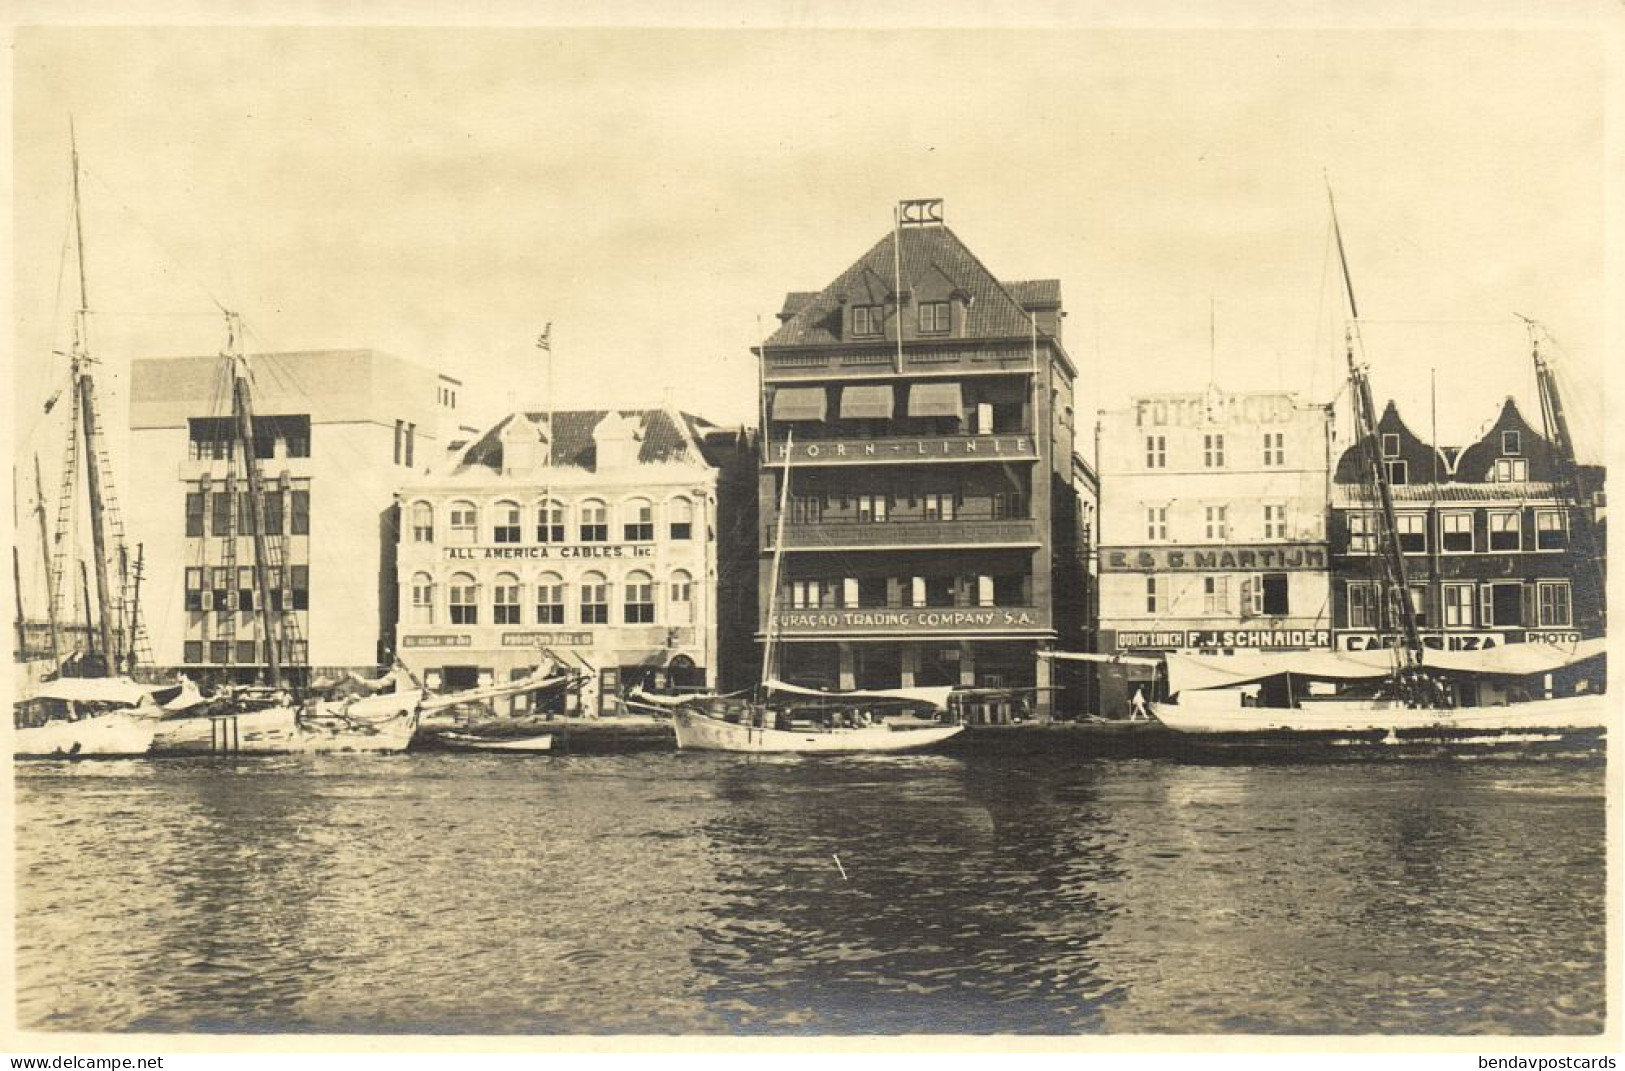 Curacao, N.W.I., WILLEMSTAD, Waterfront, Horn Line 1930s Spritzer RPPC Postcard - Curaçao